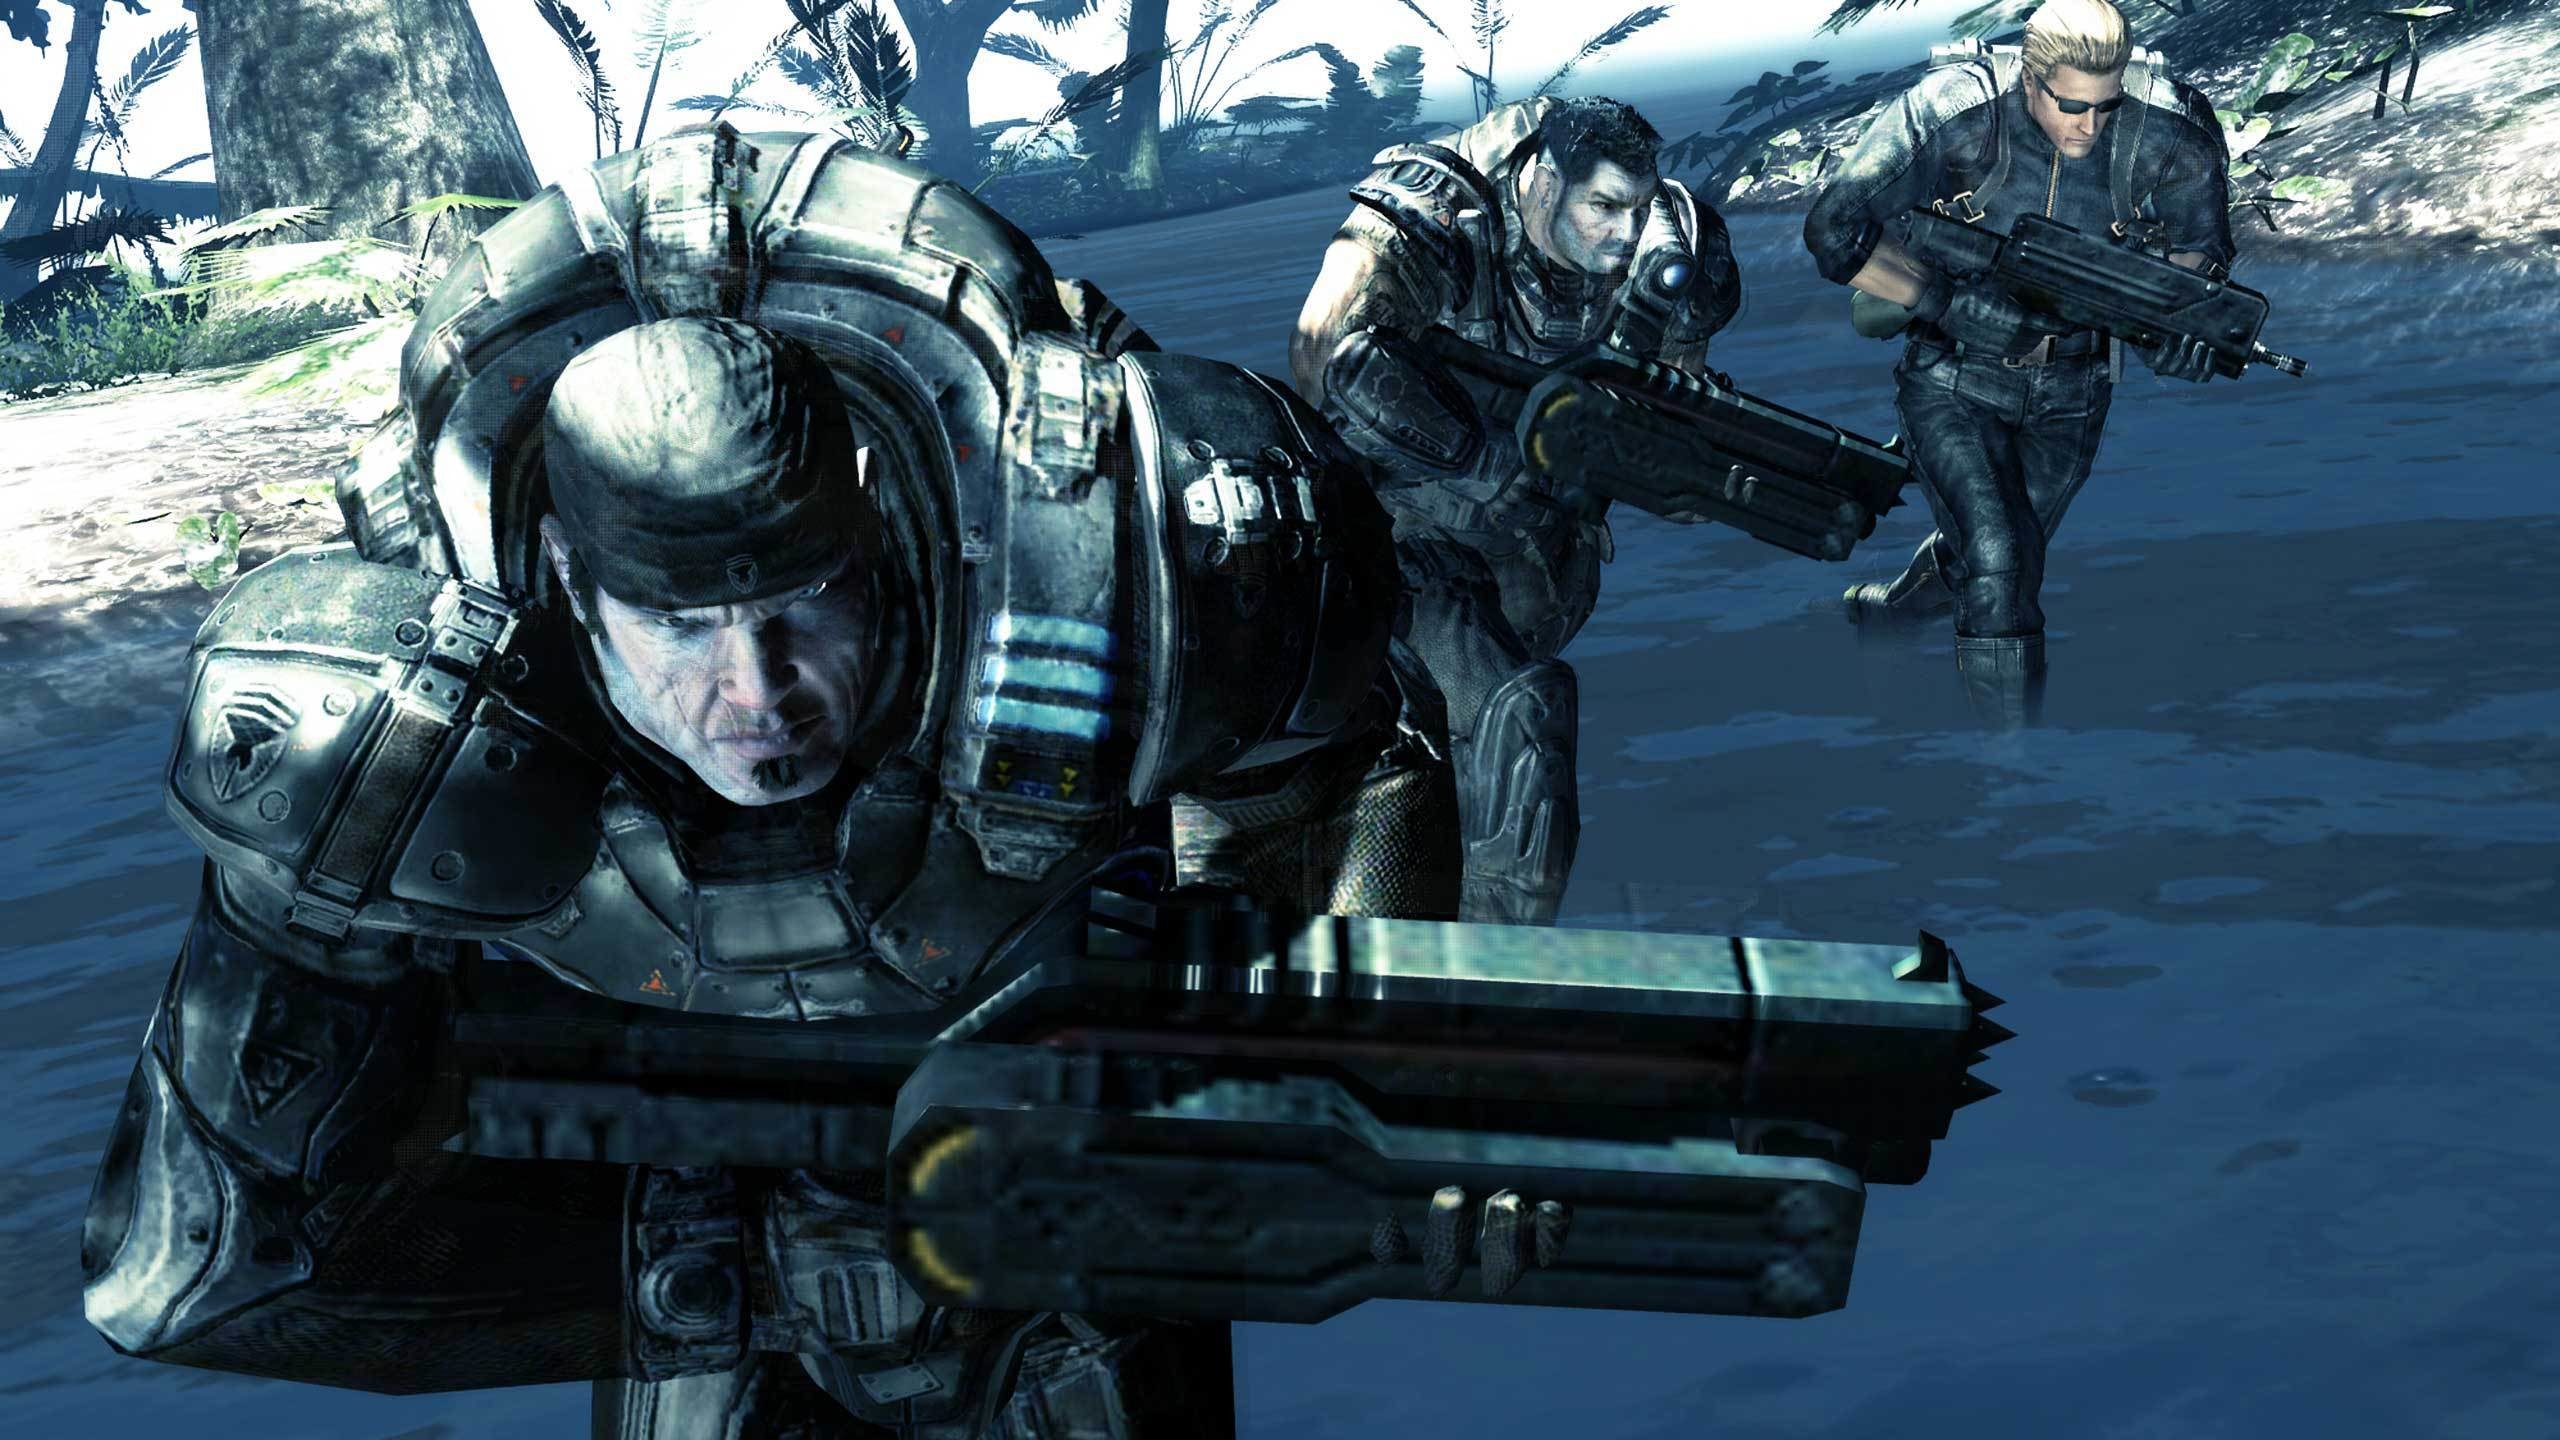 2560x1440 Lost Planet images Gears of War hits Lost Planet 2 HD wallpaper and  background photos